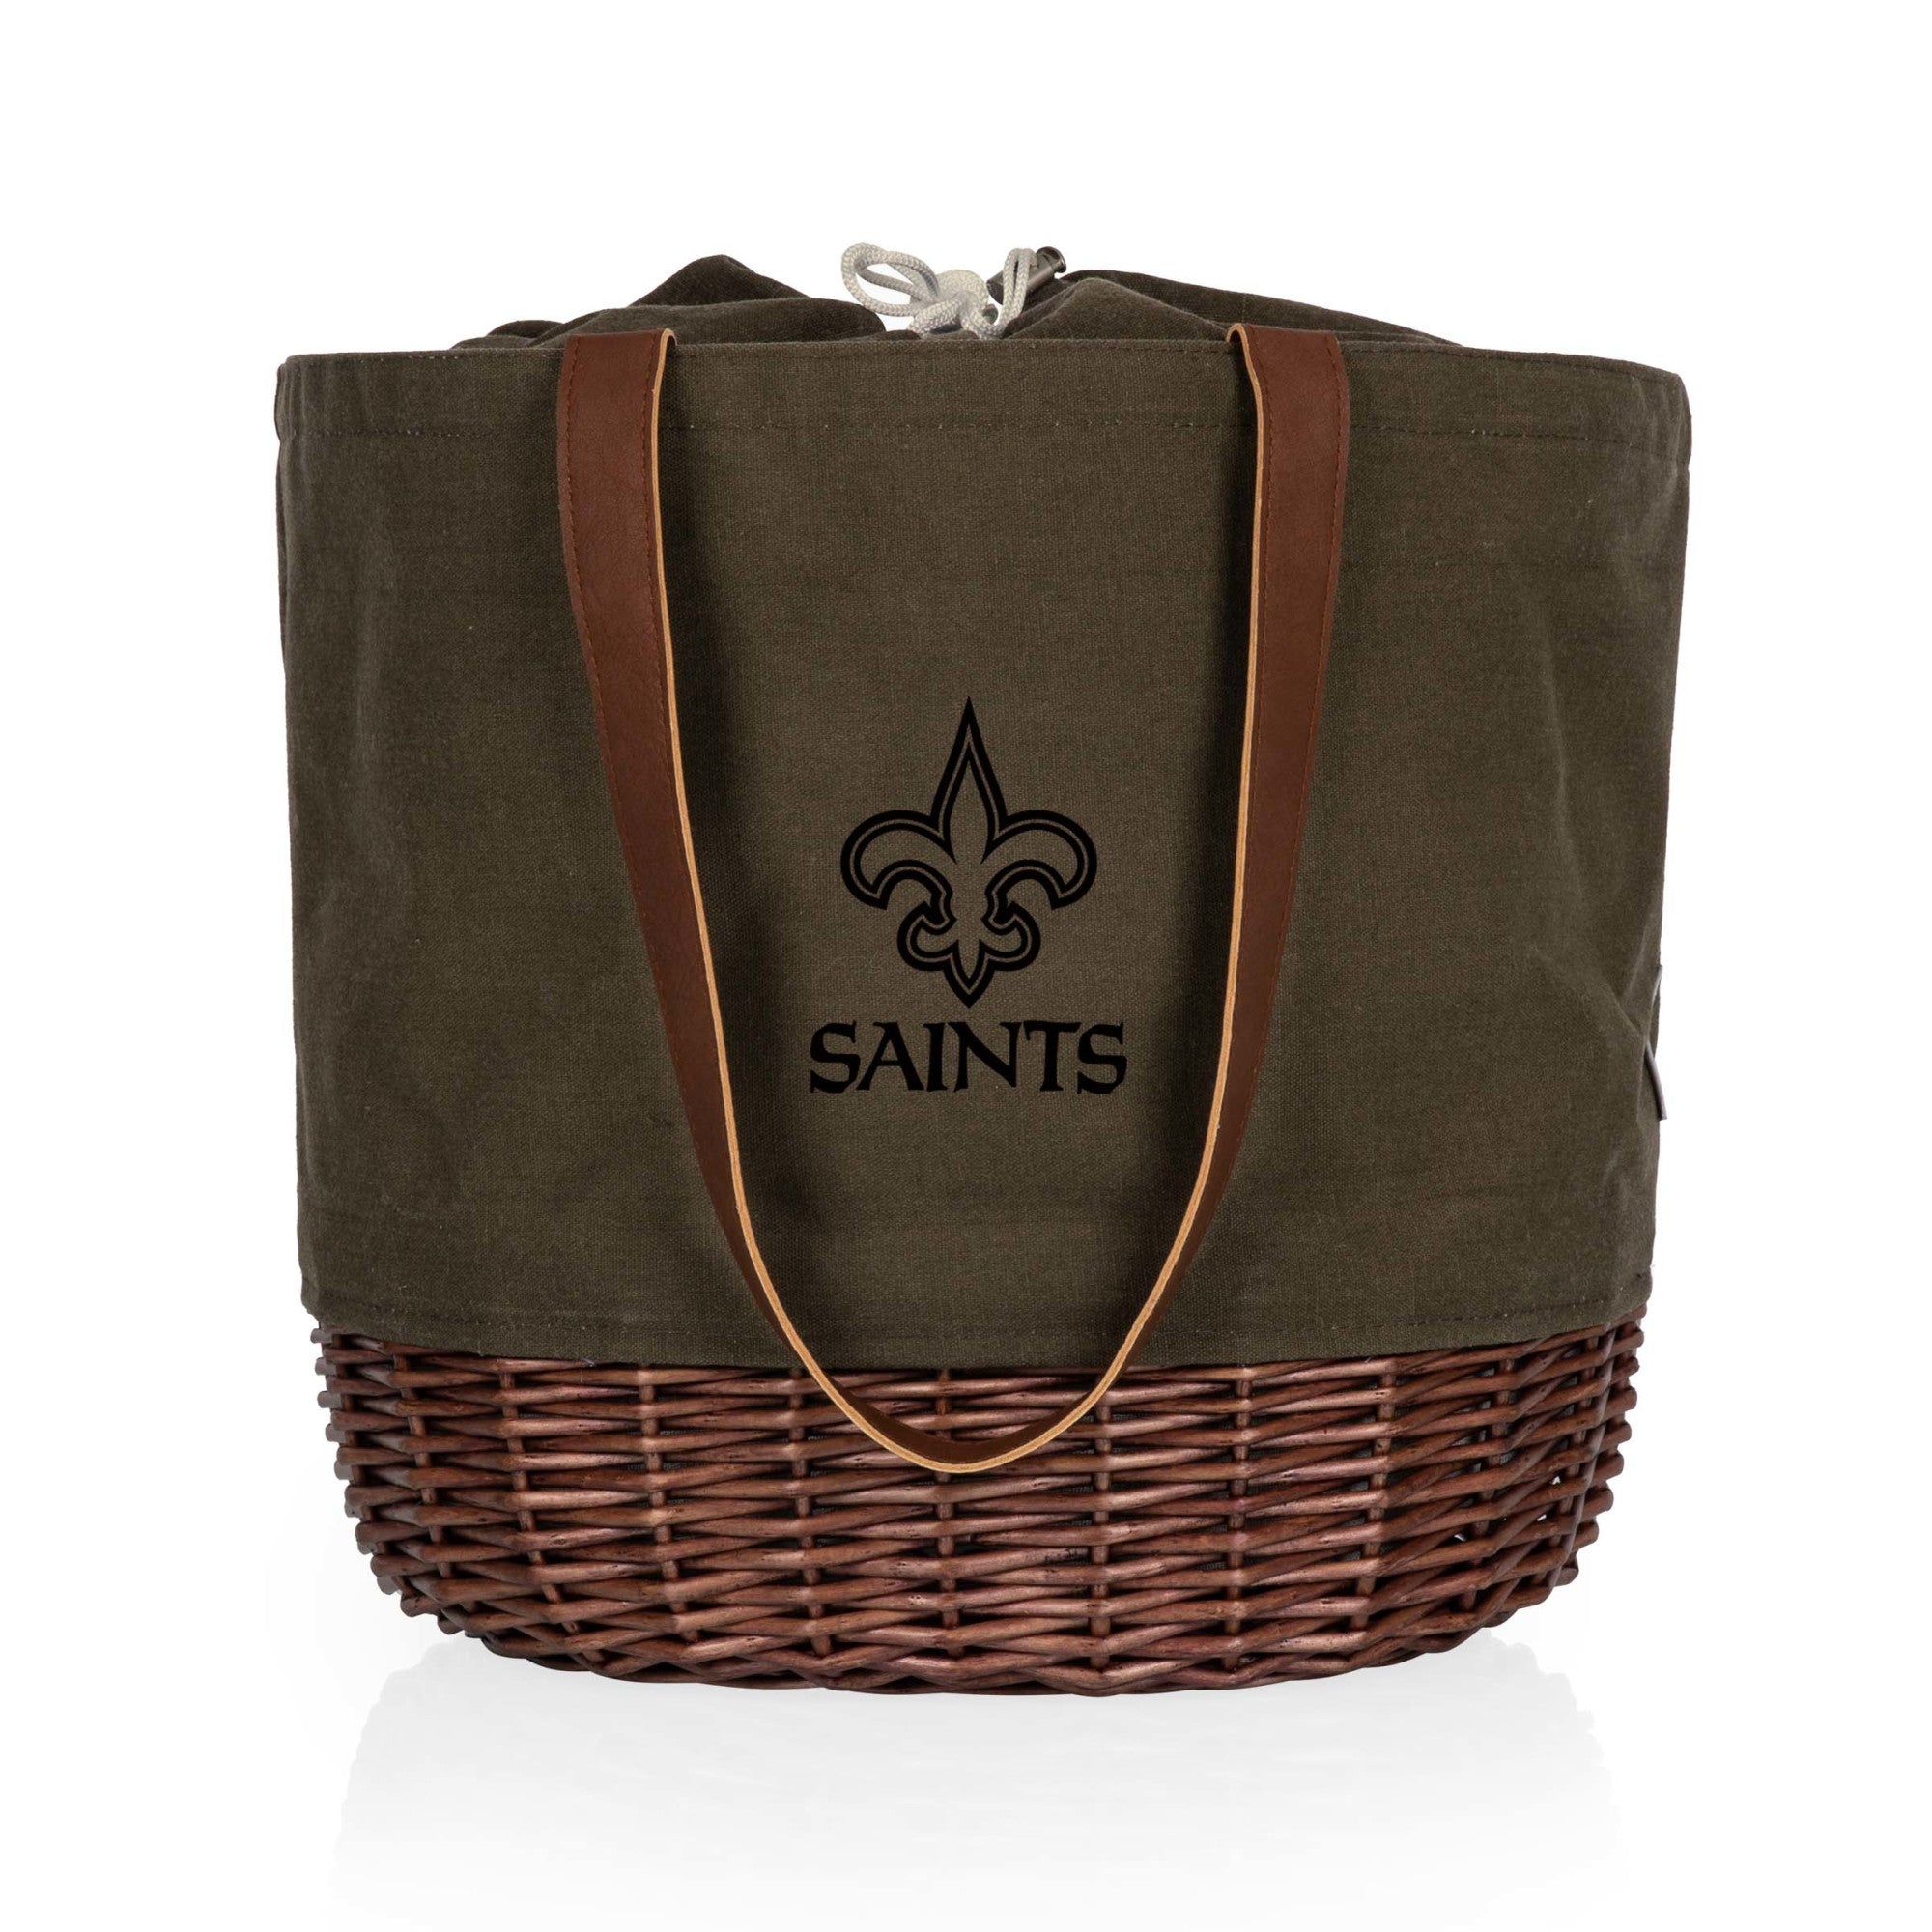 New Orleans Saints - Coronado Canvas and Willow Basket Tote, (Khaki Green with Beige Accents)